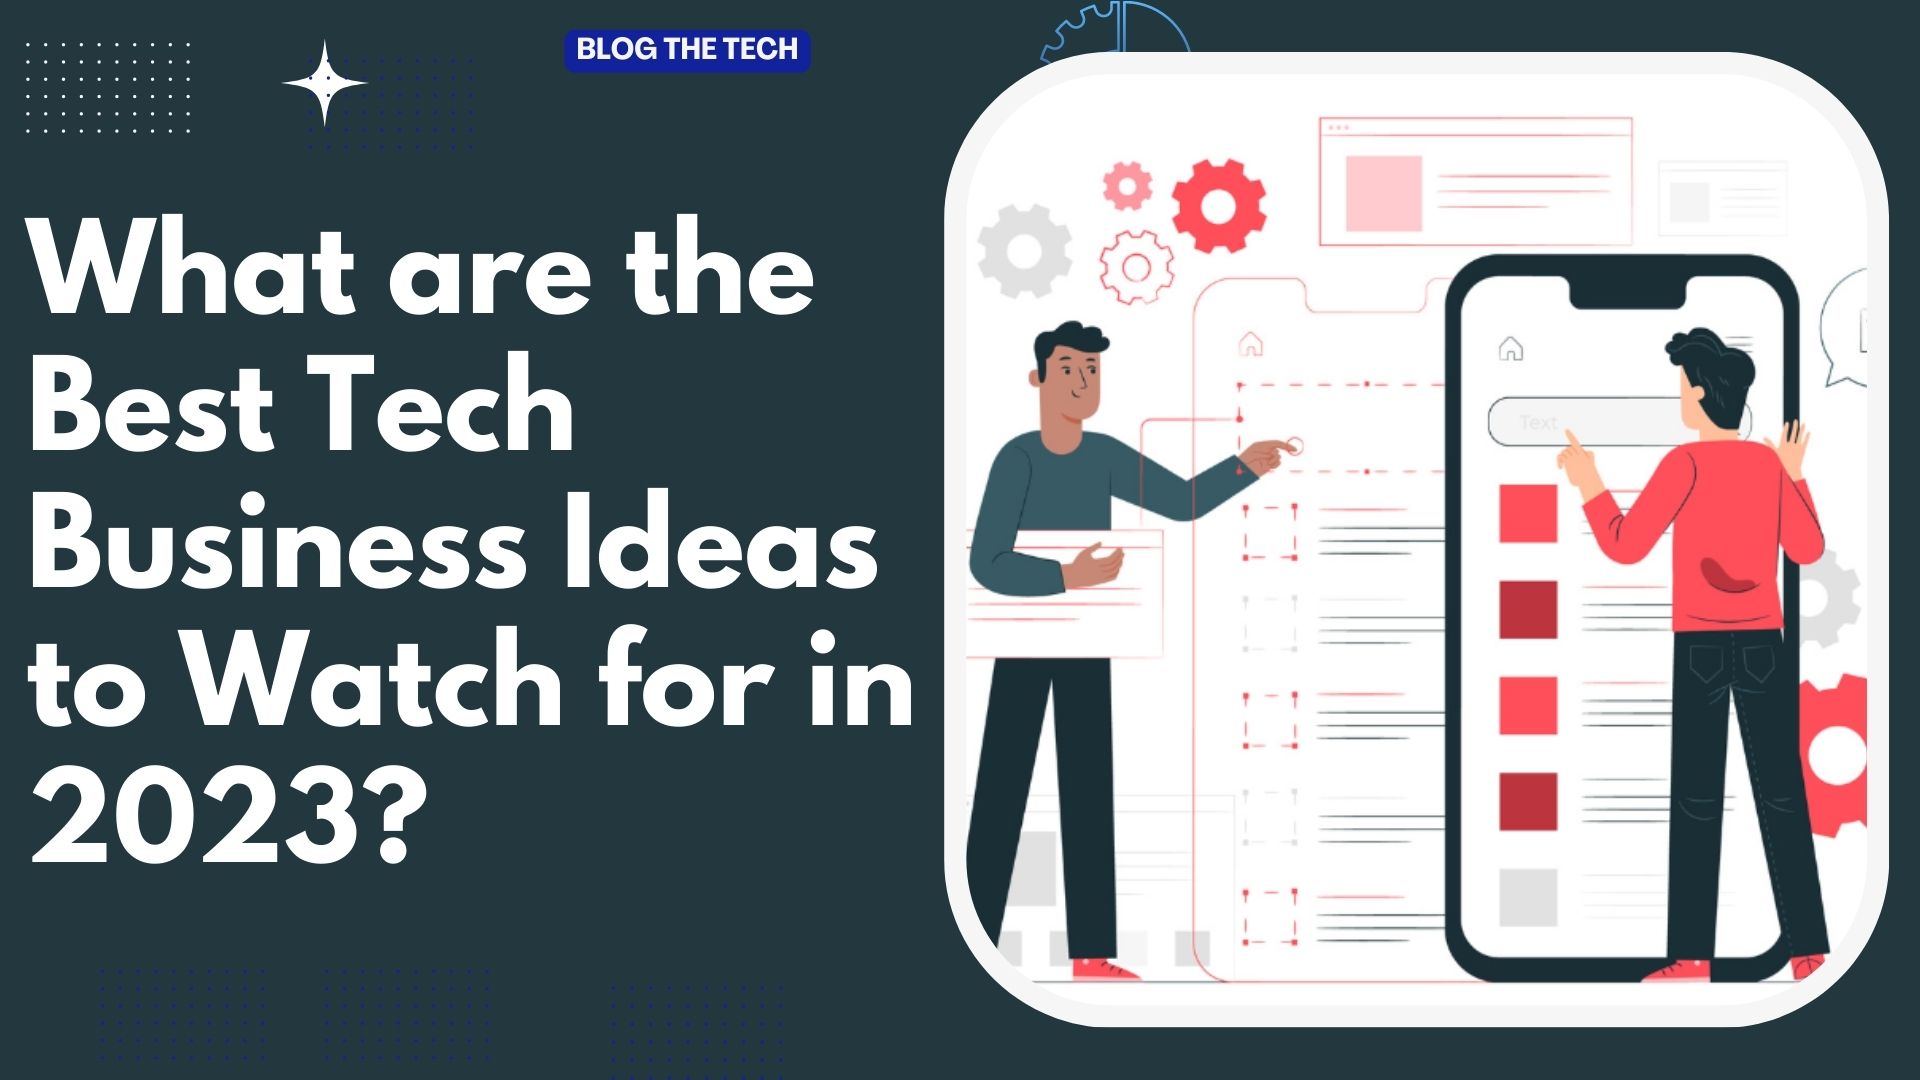 What are the Best Tech Business Ideas to Watch for in 2023?